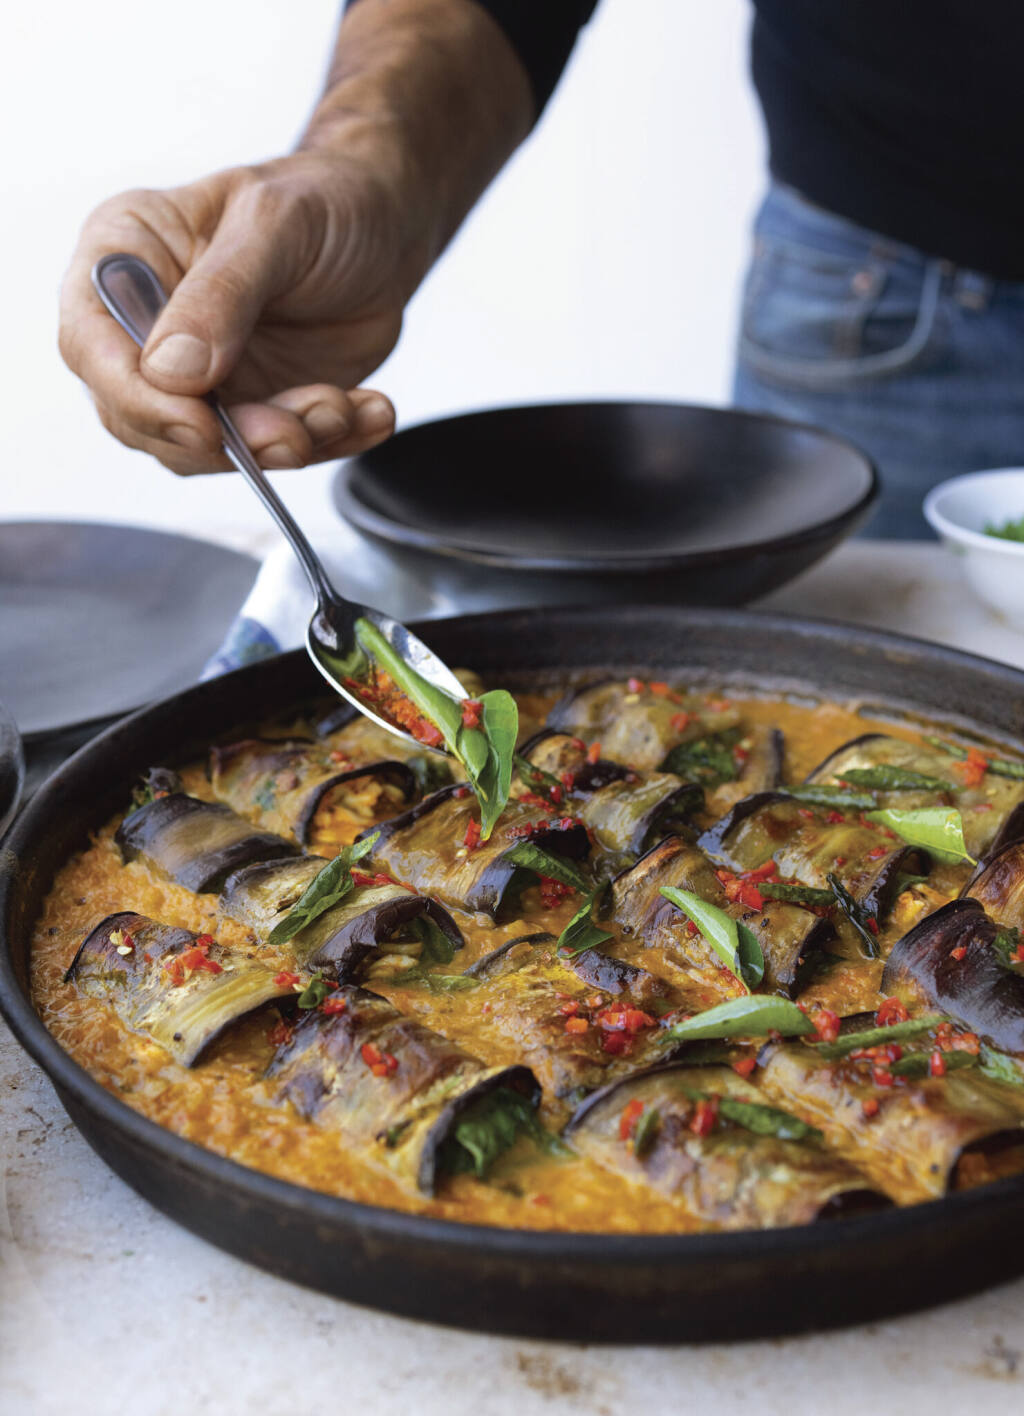 How Chef Yotam Ottolenghi Reset the Table